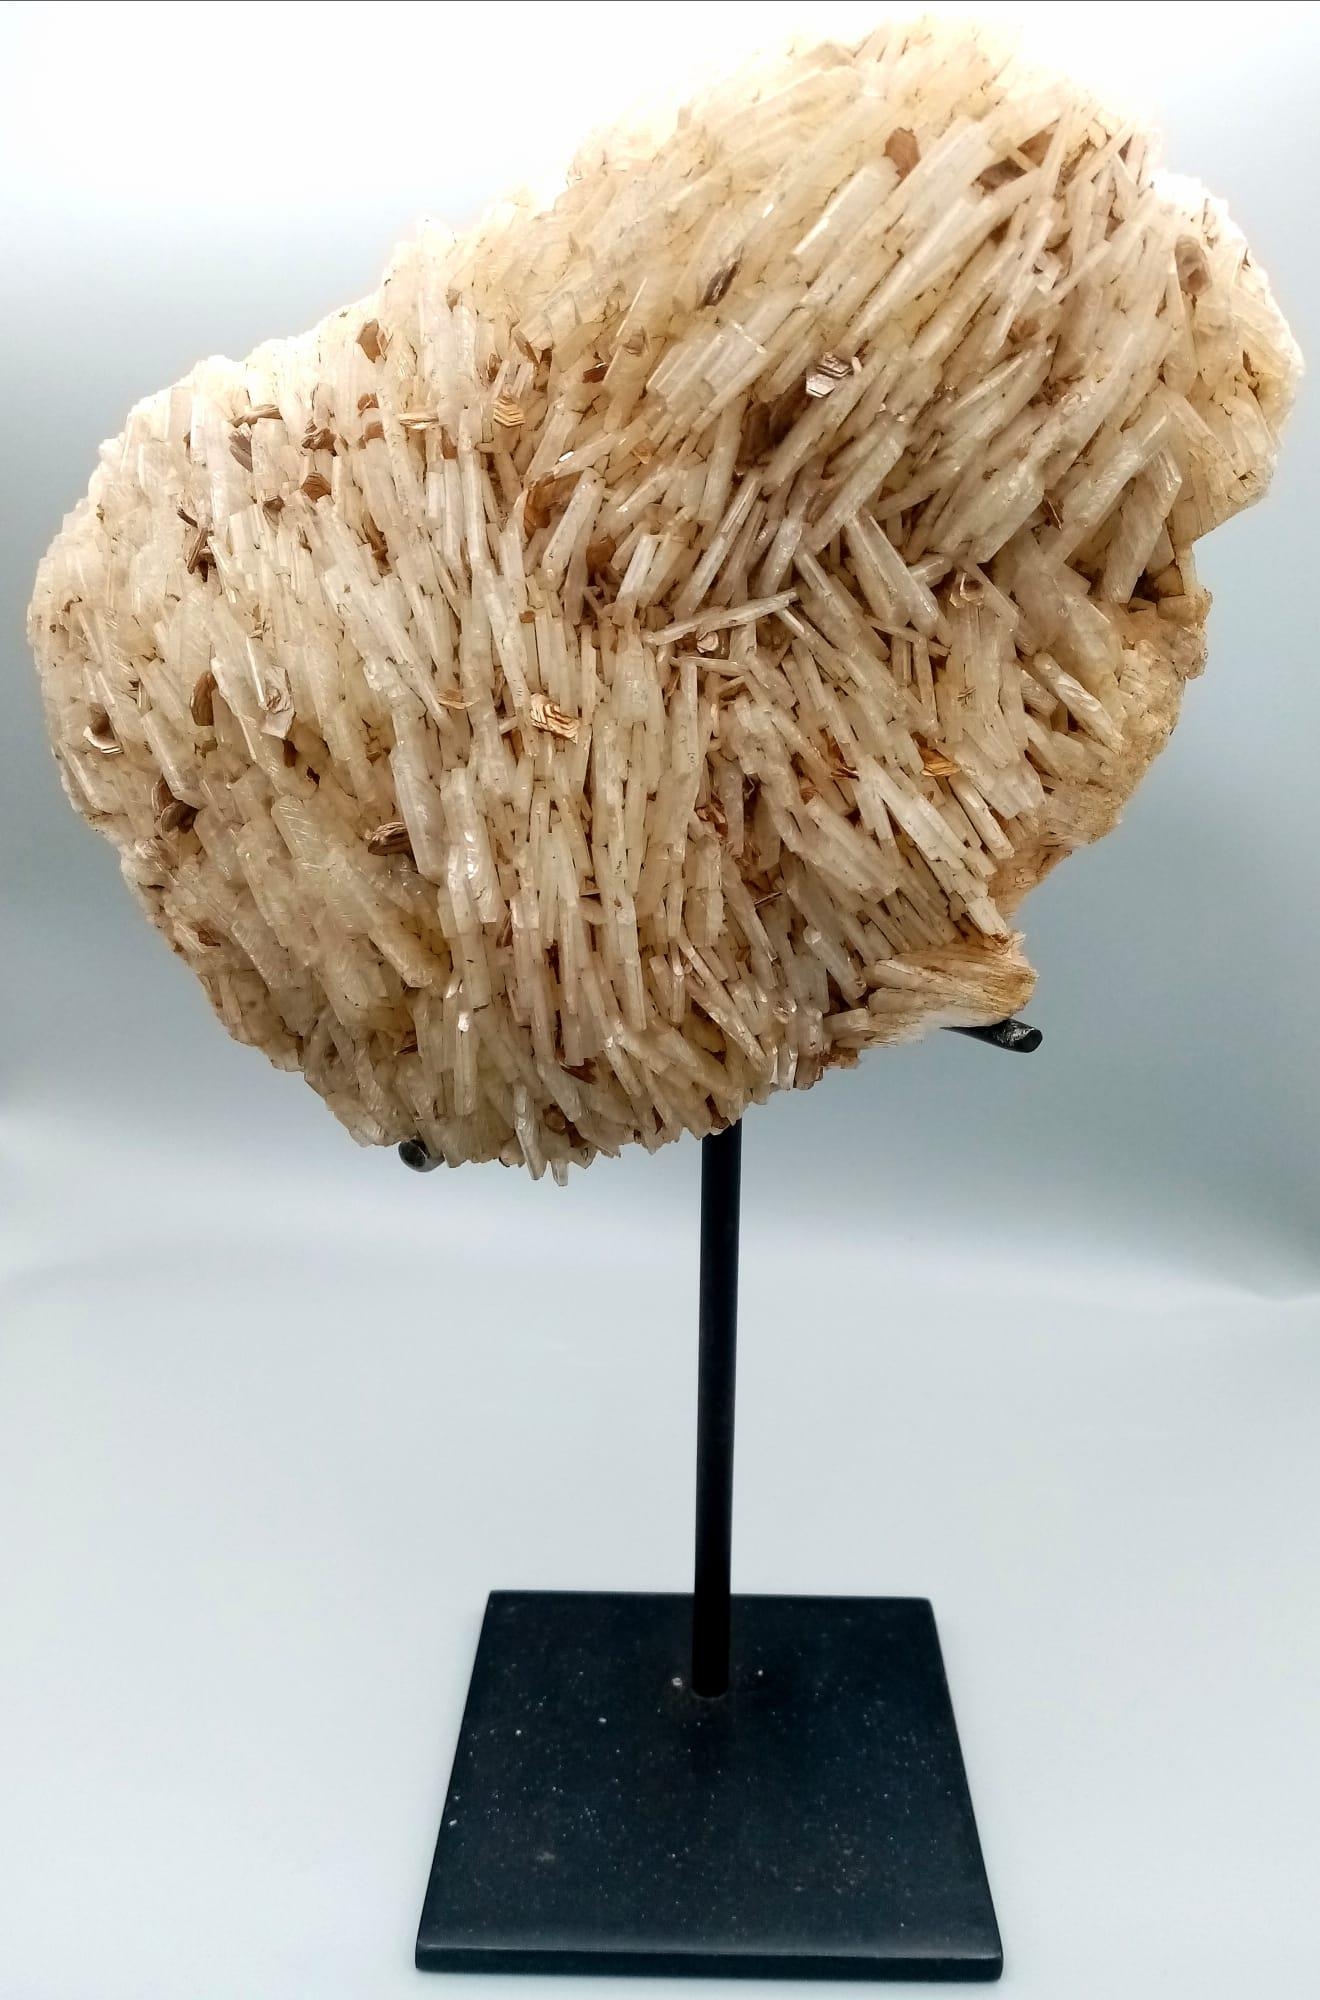 A Large Crystal Mass Specimen of Clevelandite Crystals - on metal stand. 14cm x 16cm. 1020g weight.